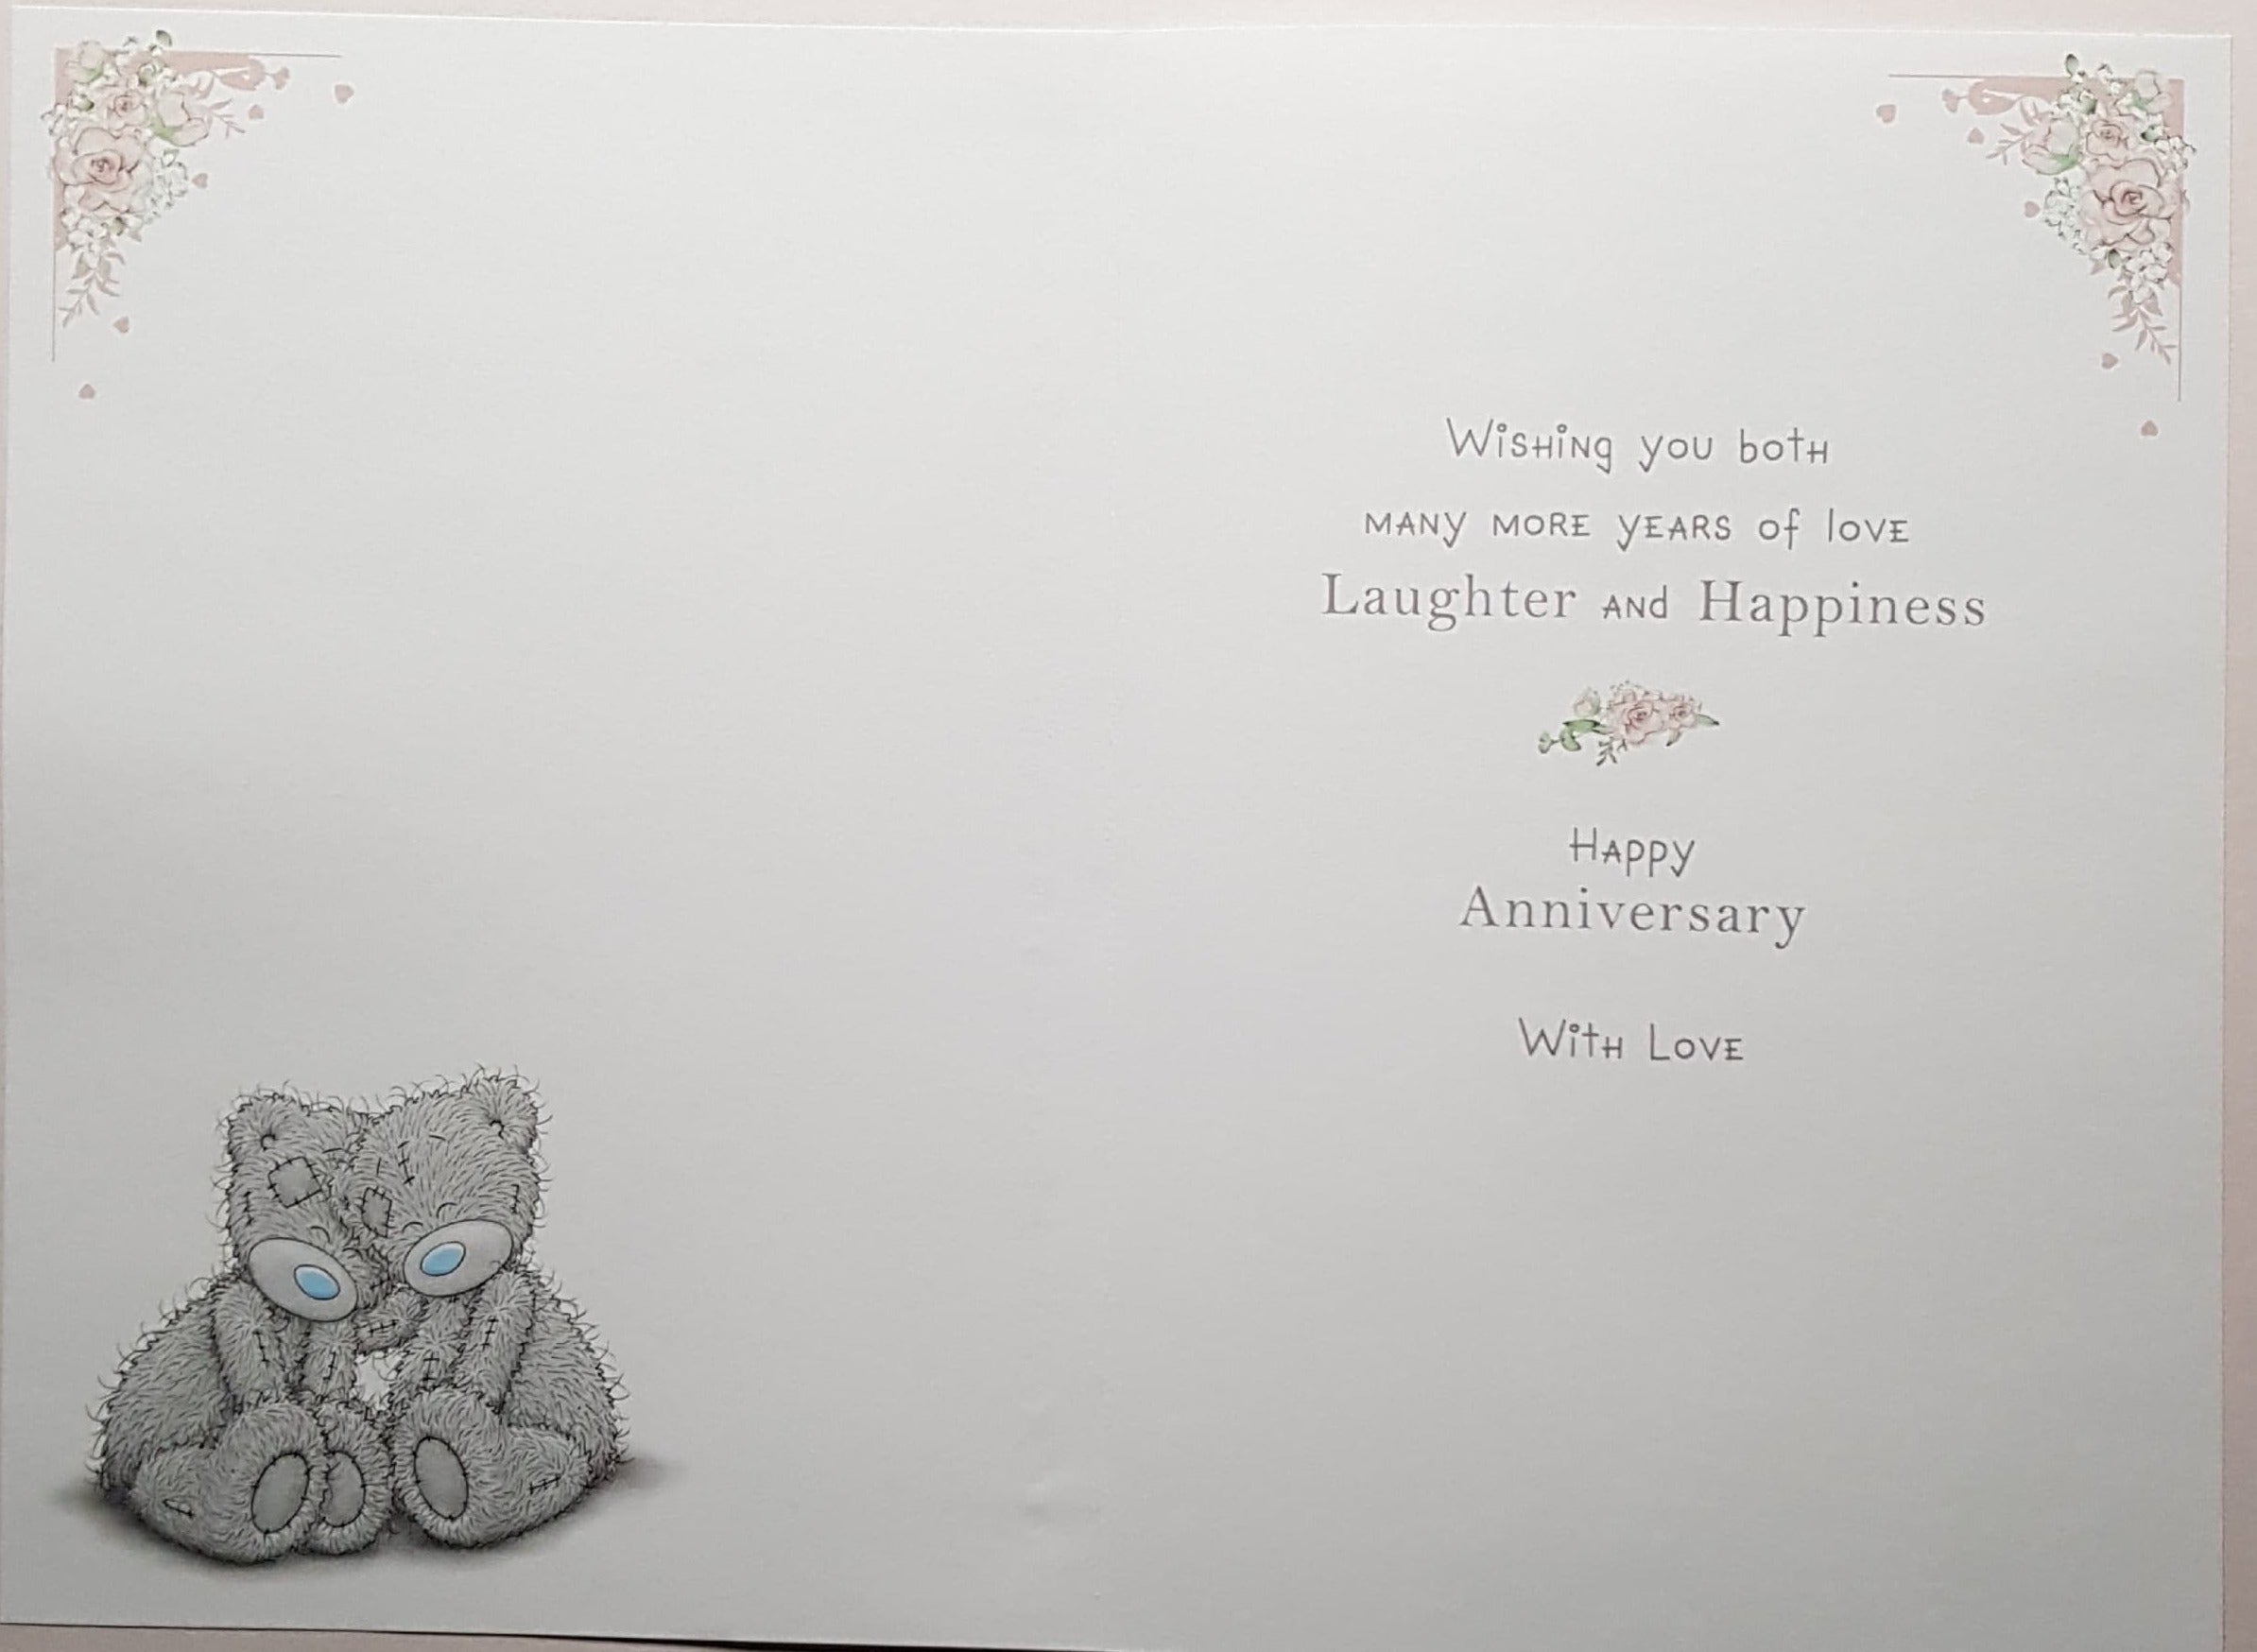 Anniversary Card - Special Couple / A Sweet Kiss To A Teddy